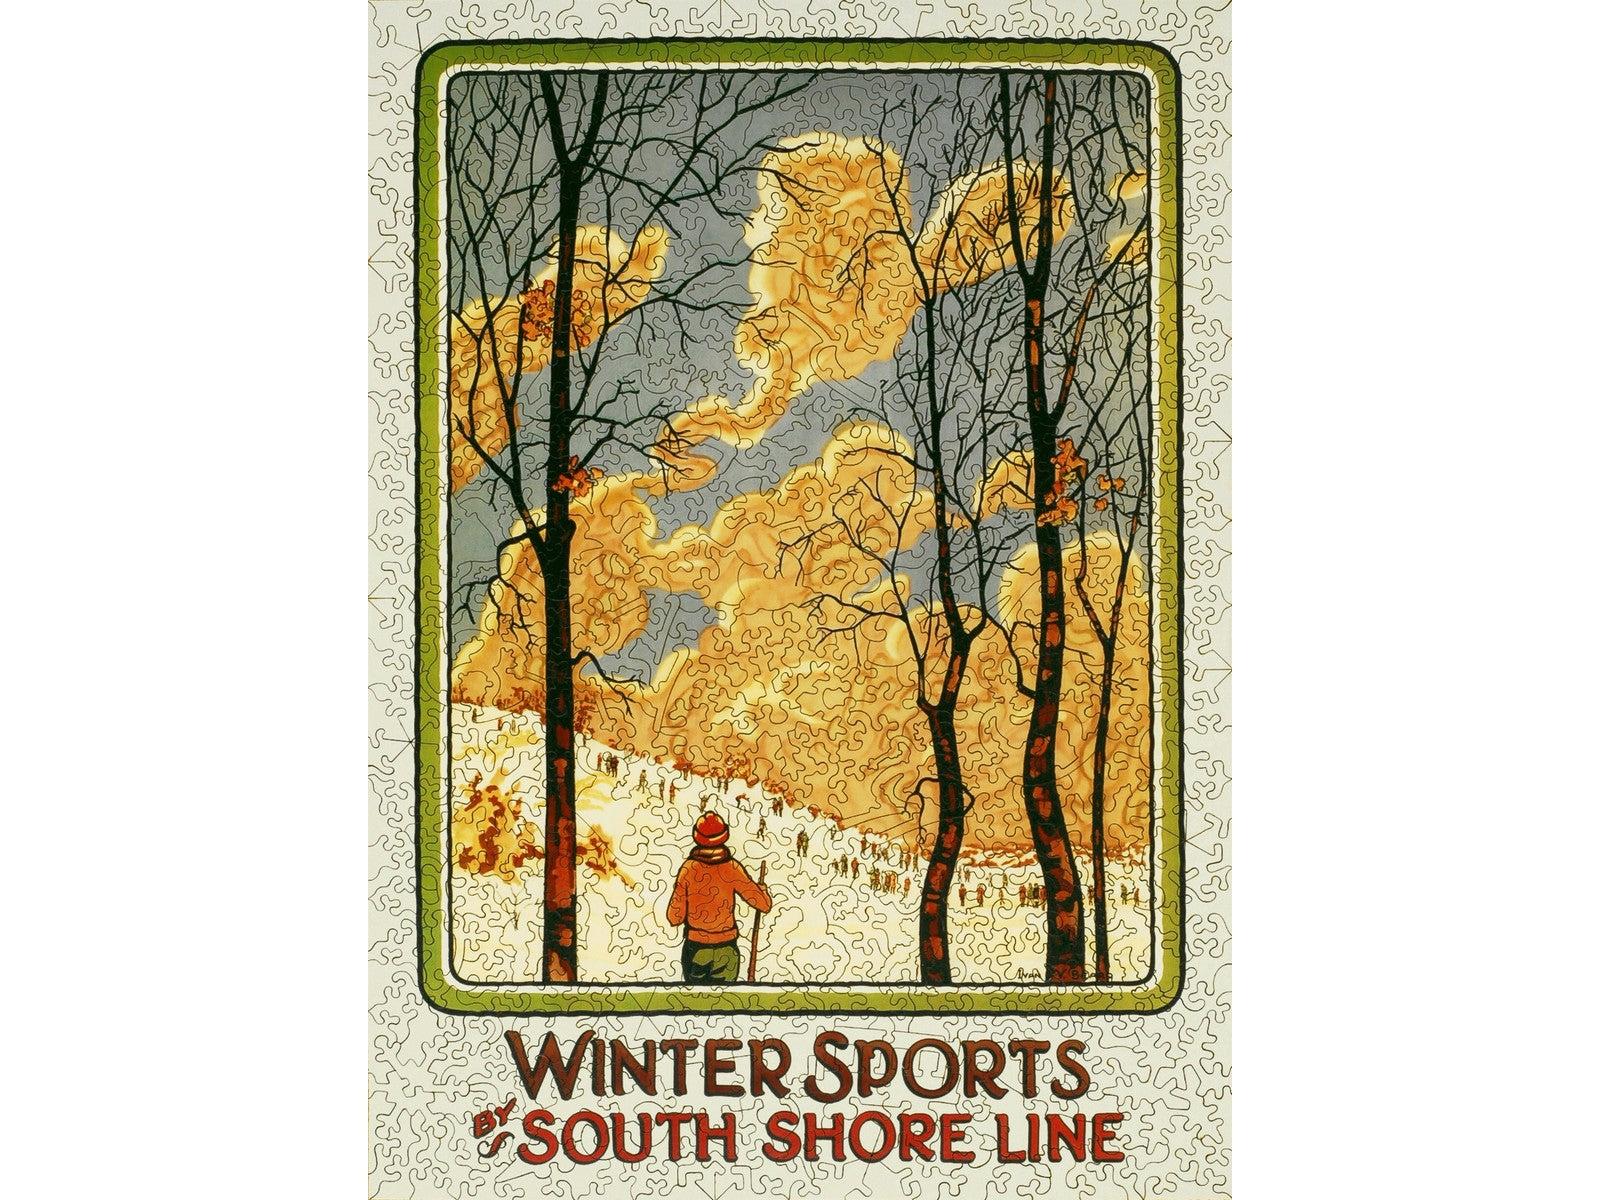 The front of the puzzle, Winter Sports by South Shore Line, which shows people skiing down a snowy slope with trees in the foreground, and text saying "Winter Sports by South Shore Line".